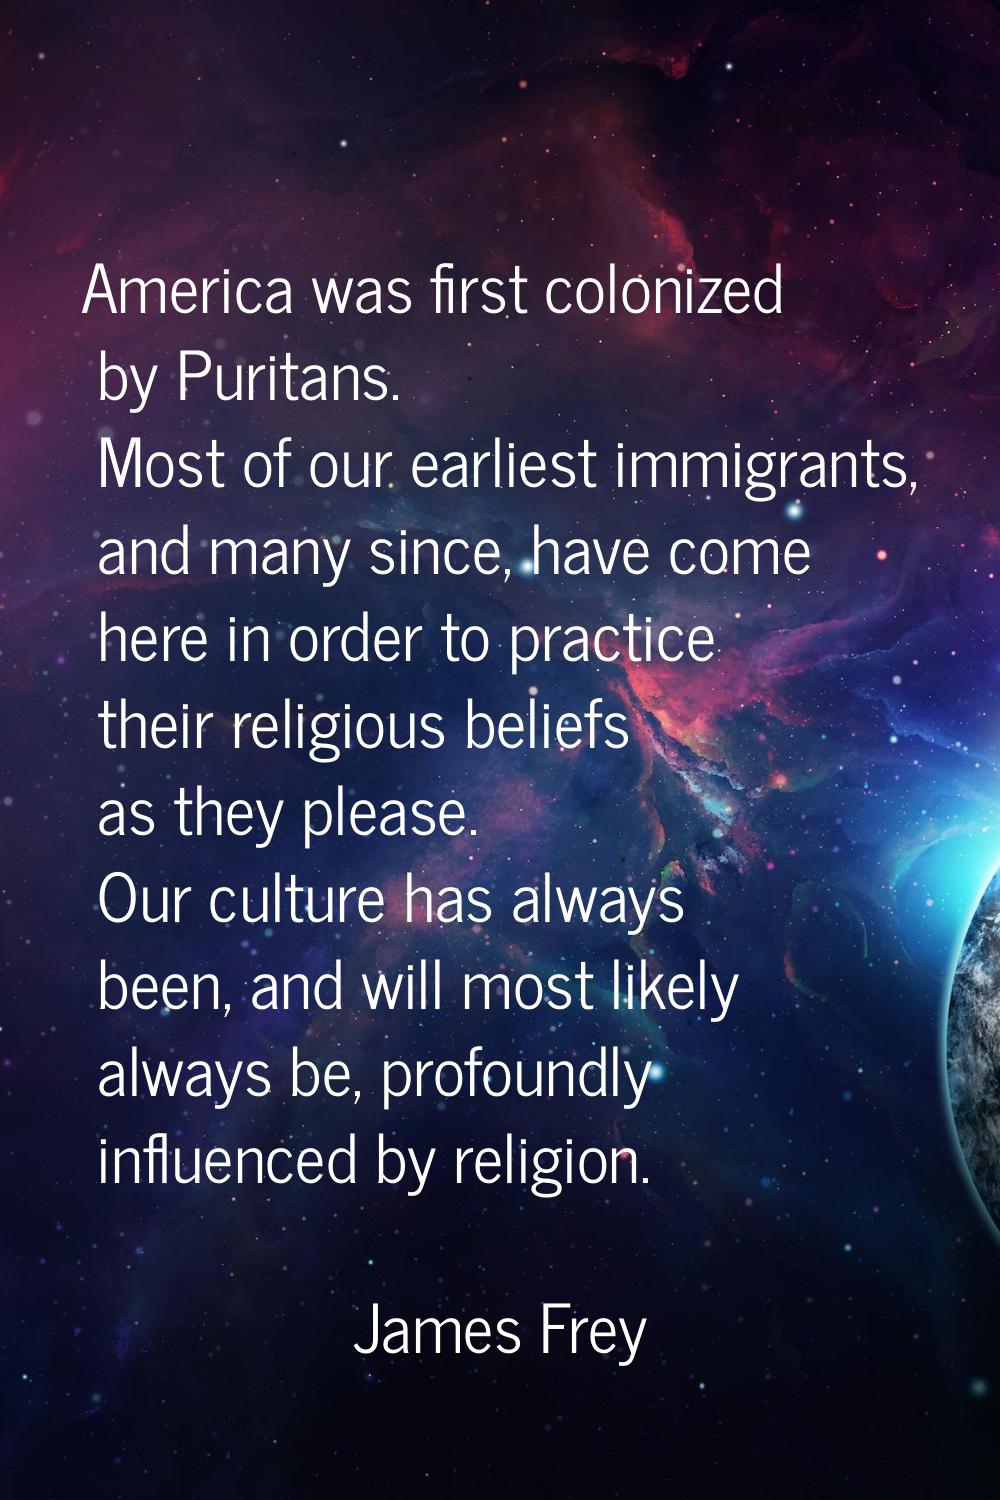 America was first colonized by Puritans. Most of our earliest immigrants, and many since, have come